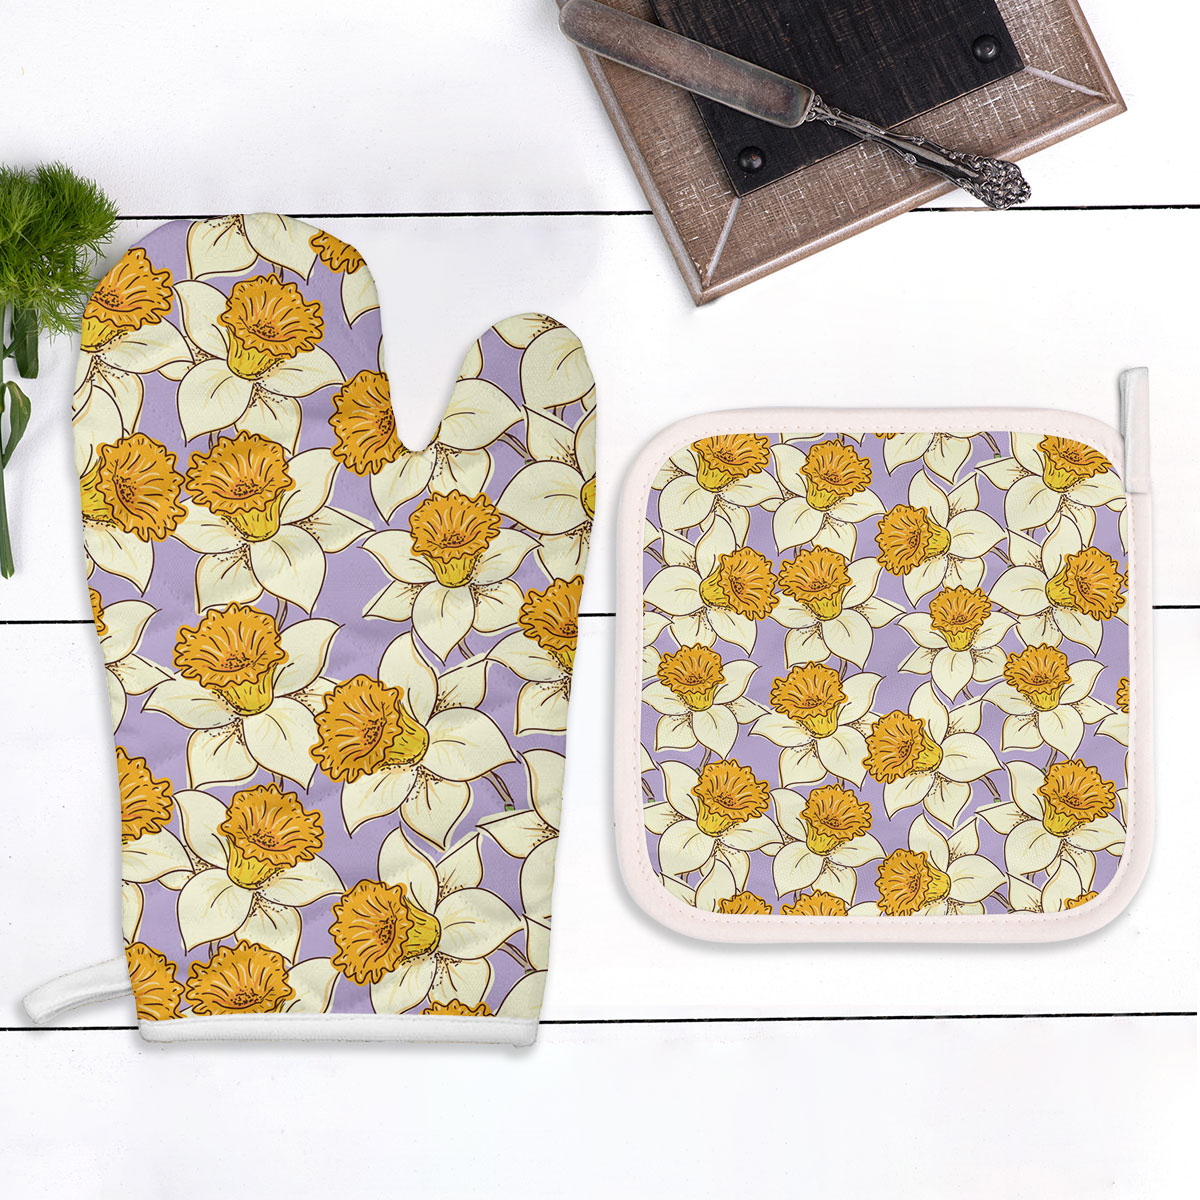 White Daffodils On Purple Background Oven Mitts Pot Holder Set